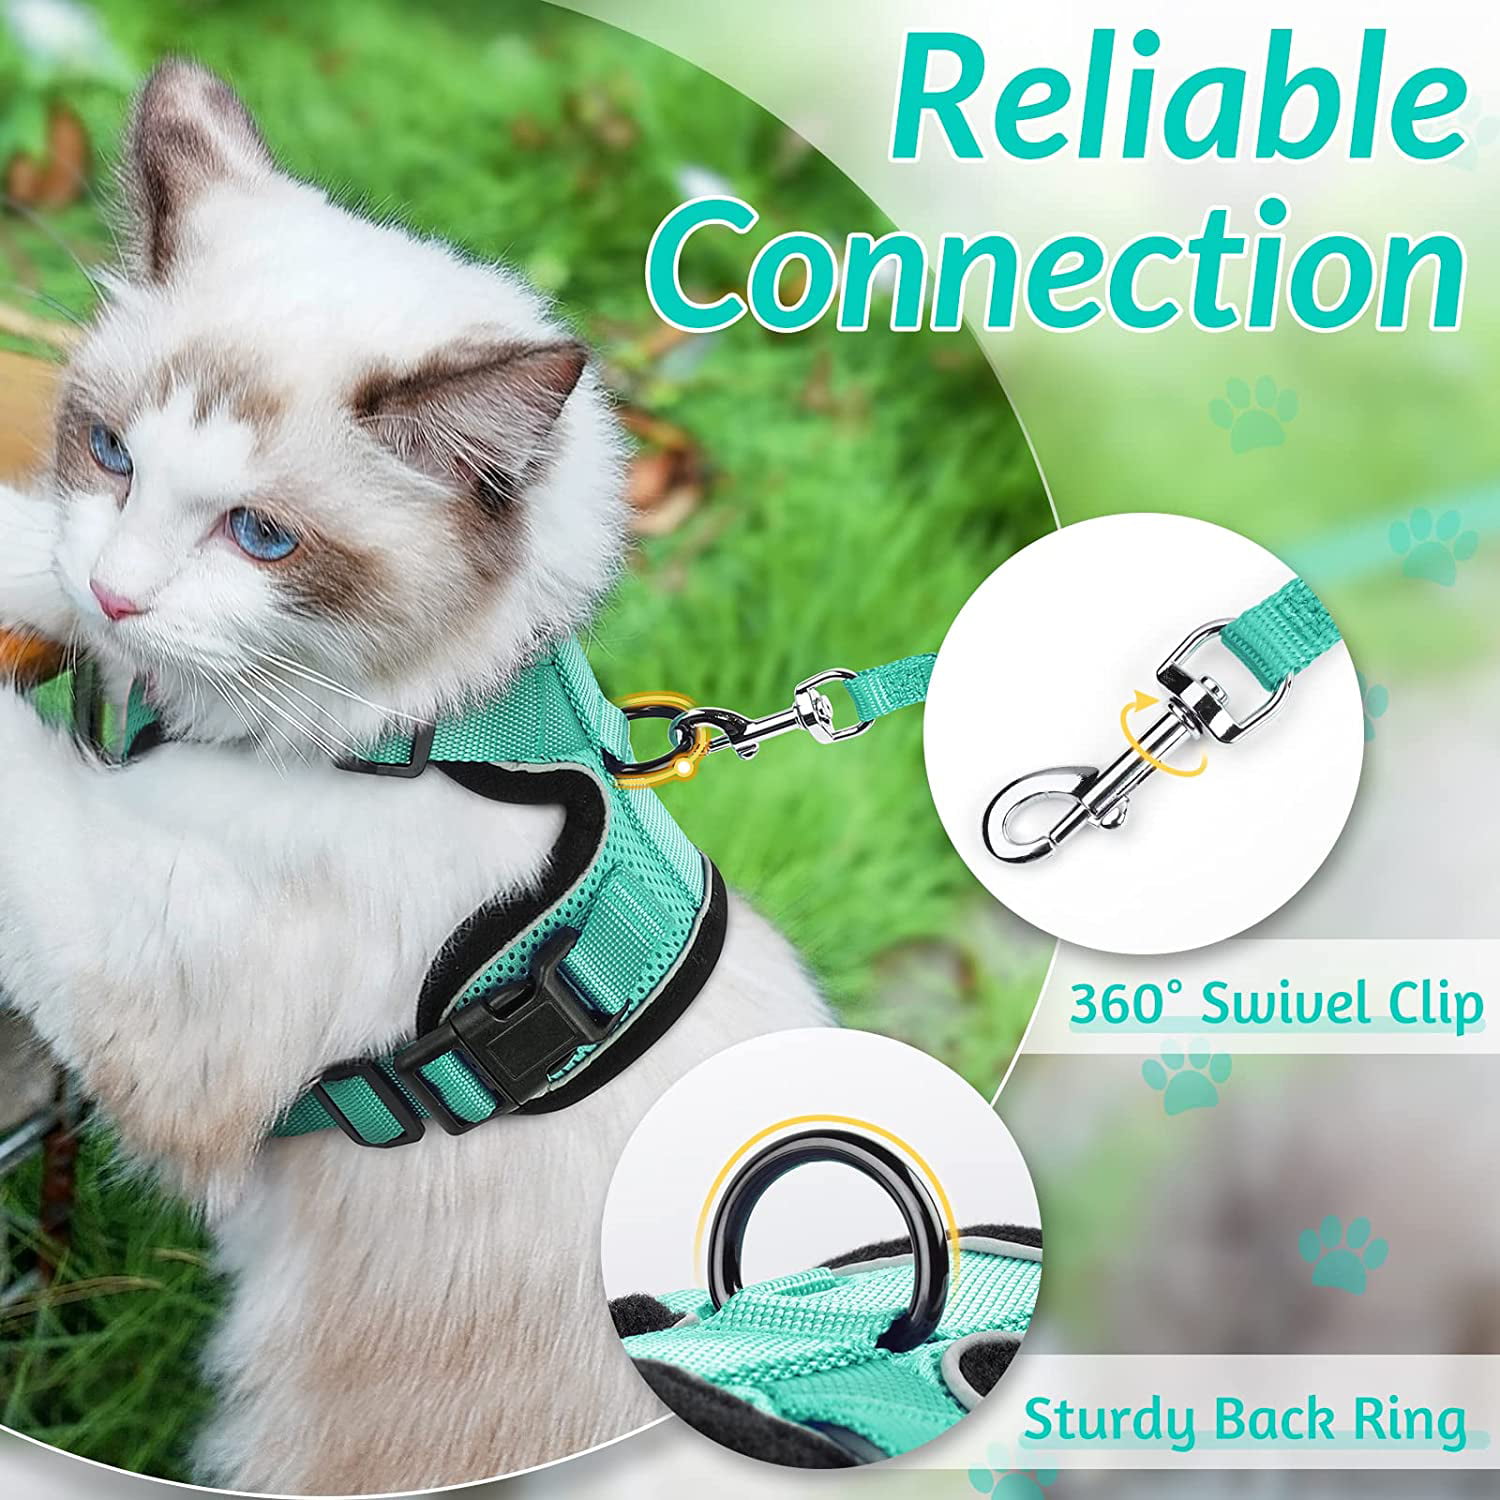 Breathable Safety and Easy Control Padded Vest for Small Cat Rabbits,XS Cat Harness Small Dog Harness with Metal Leash Clip,Escape Proof Cat Vest Harnesses Chest: 13.5-16 Adjustable Soft Mesh Vest Jacket with Reflective Strips 